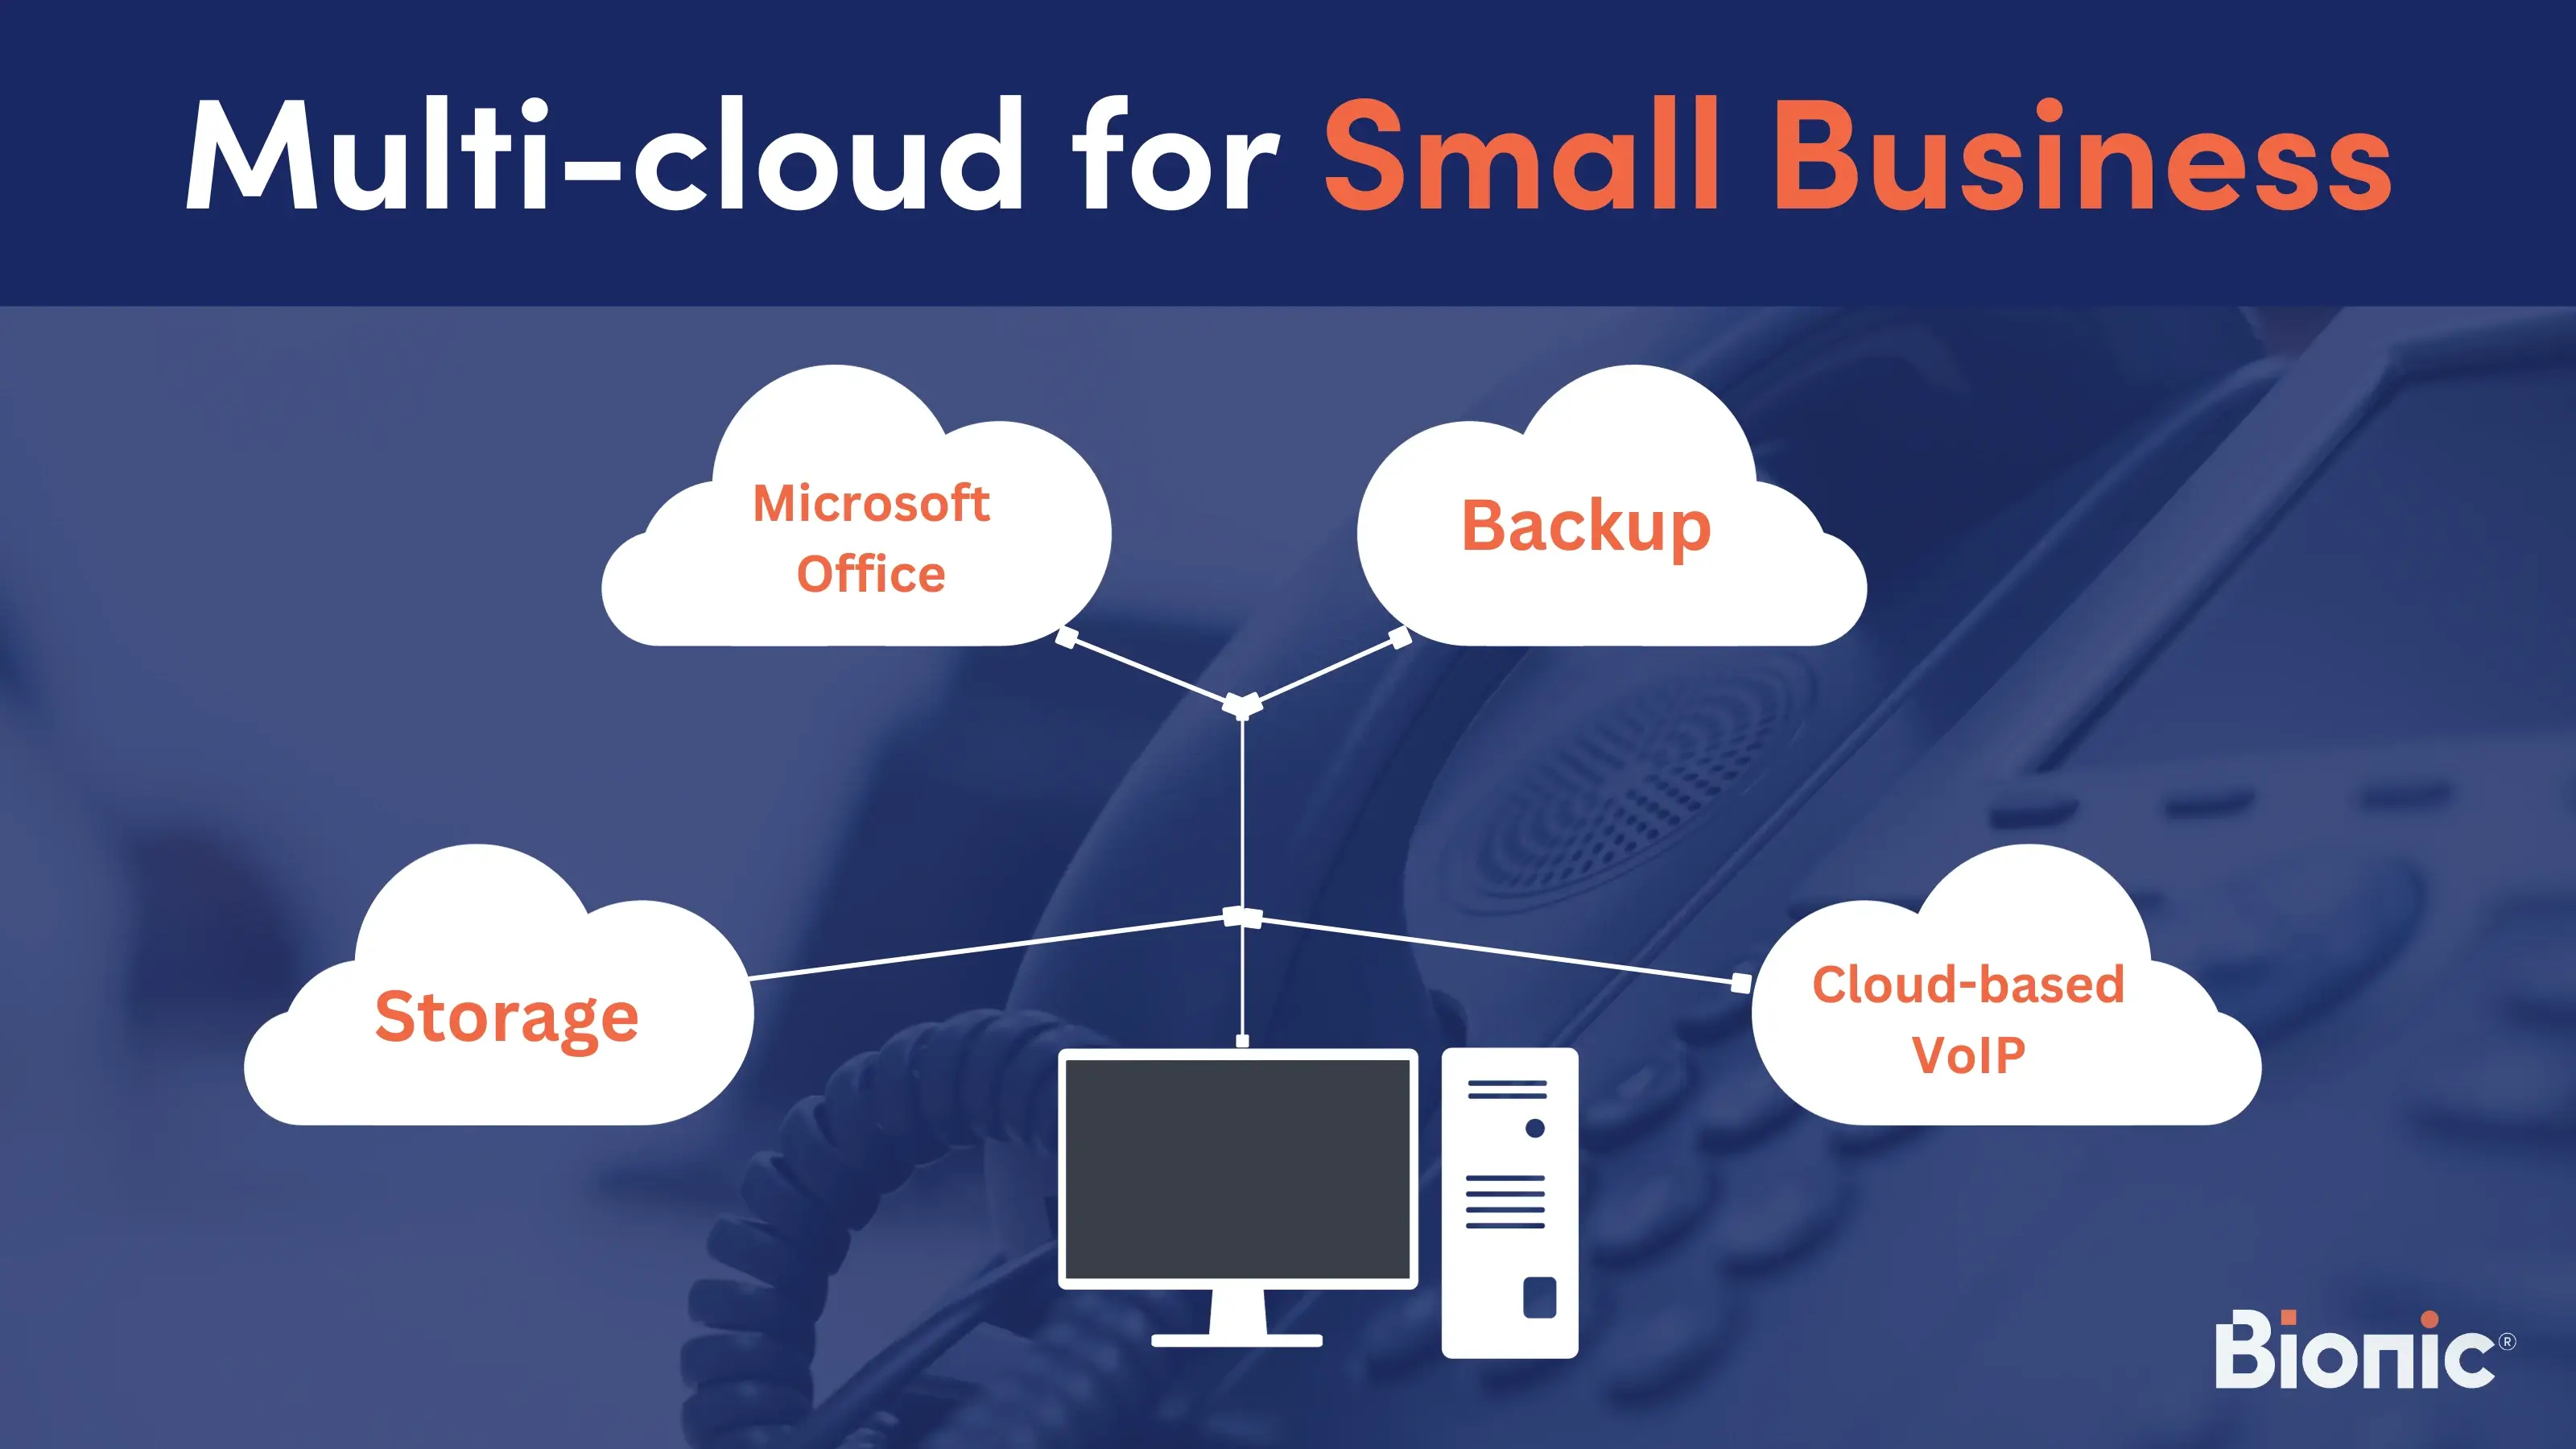 An example of a multi-cloud set up for a small business